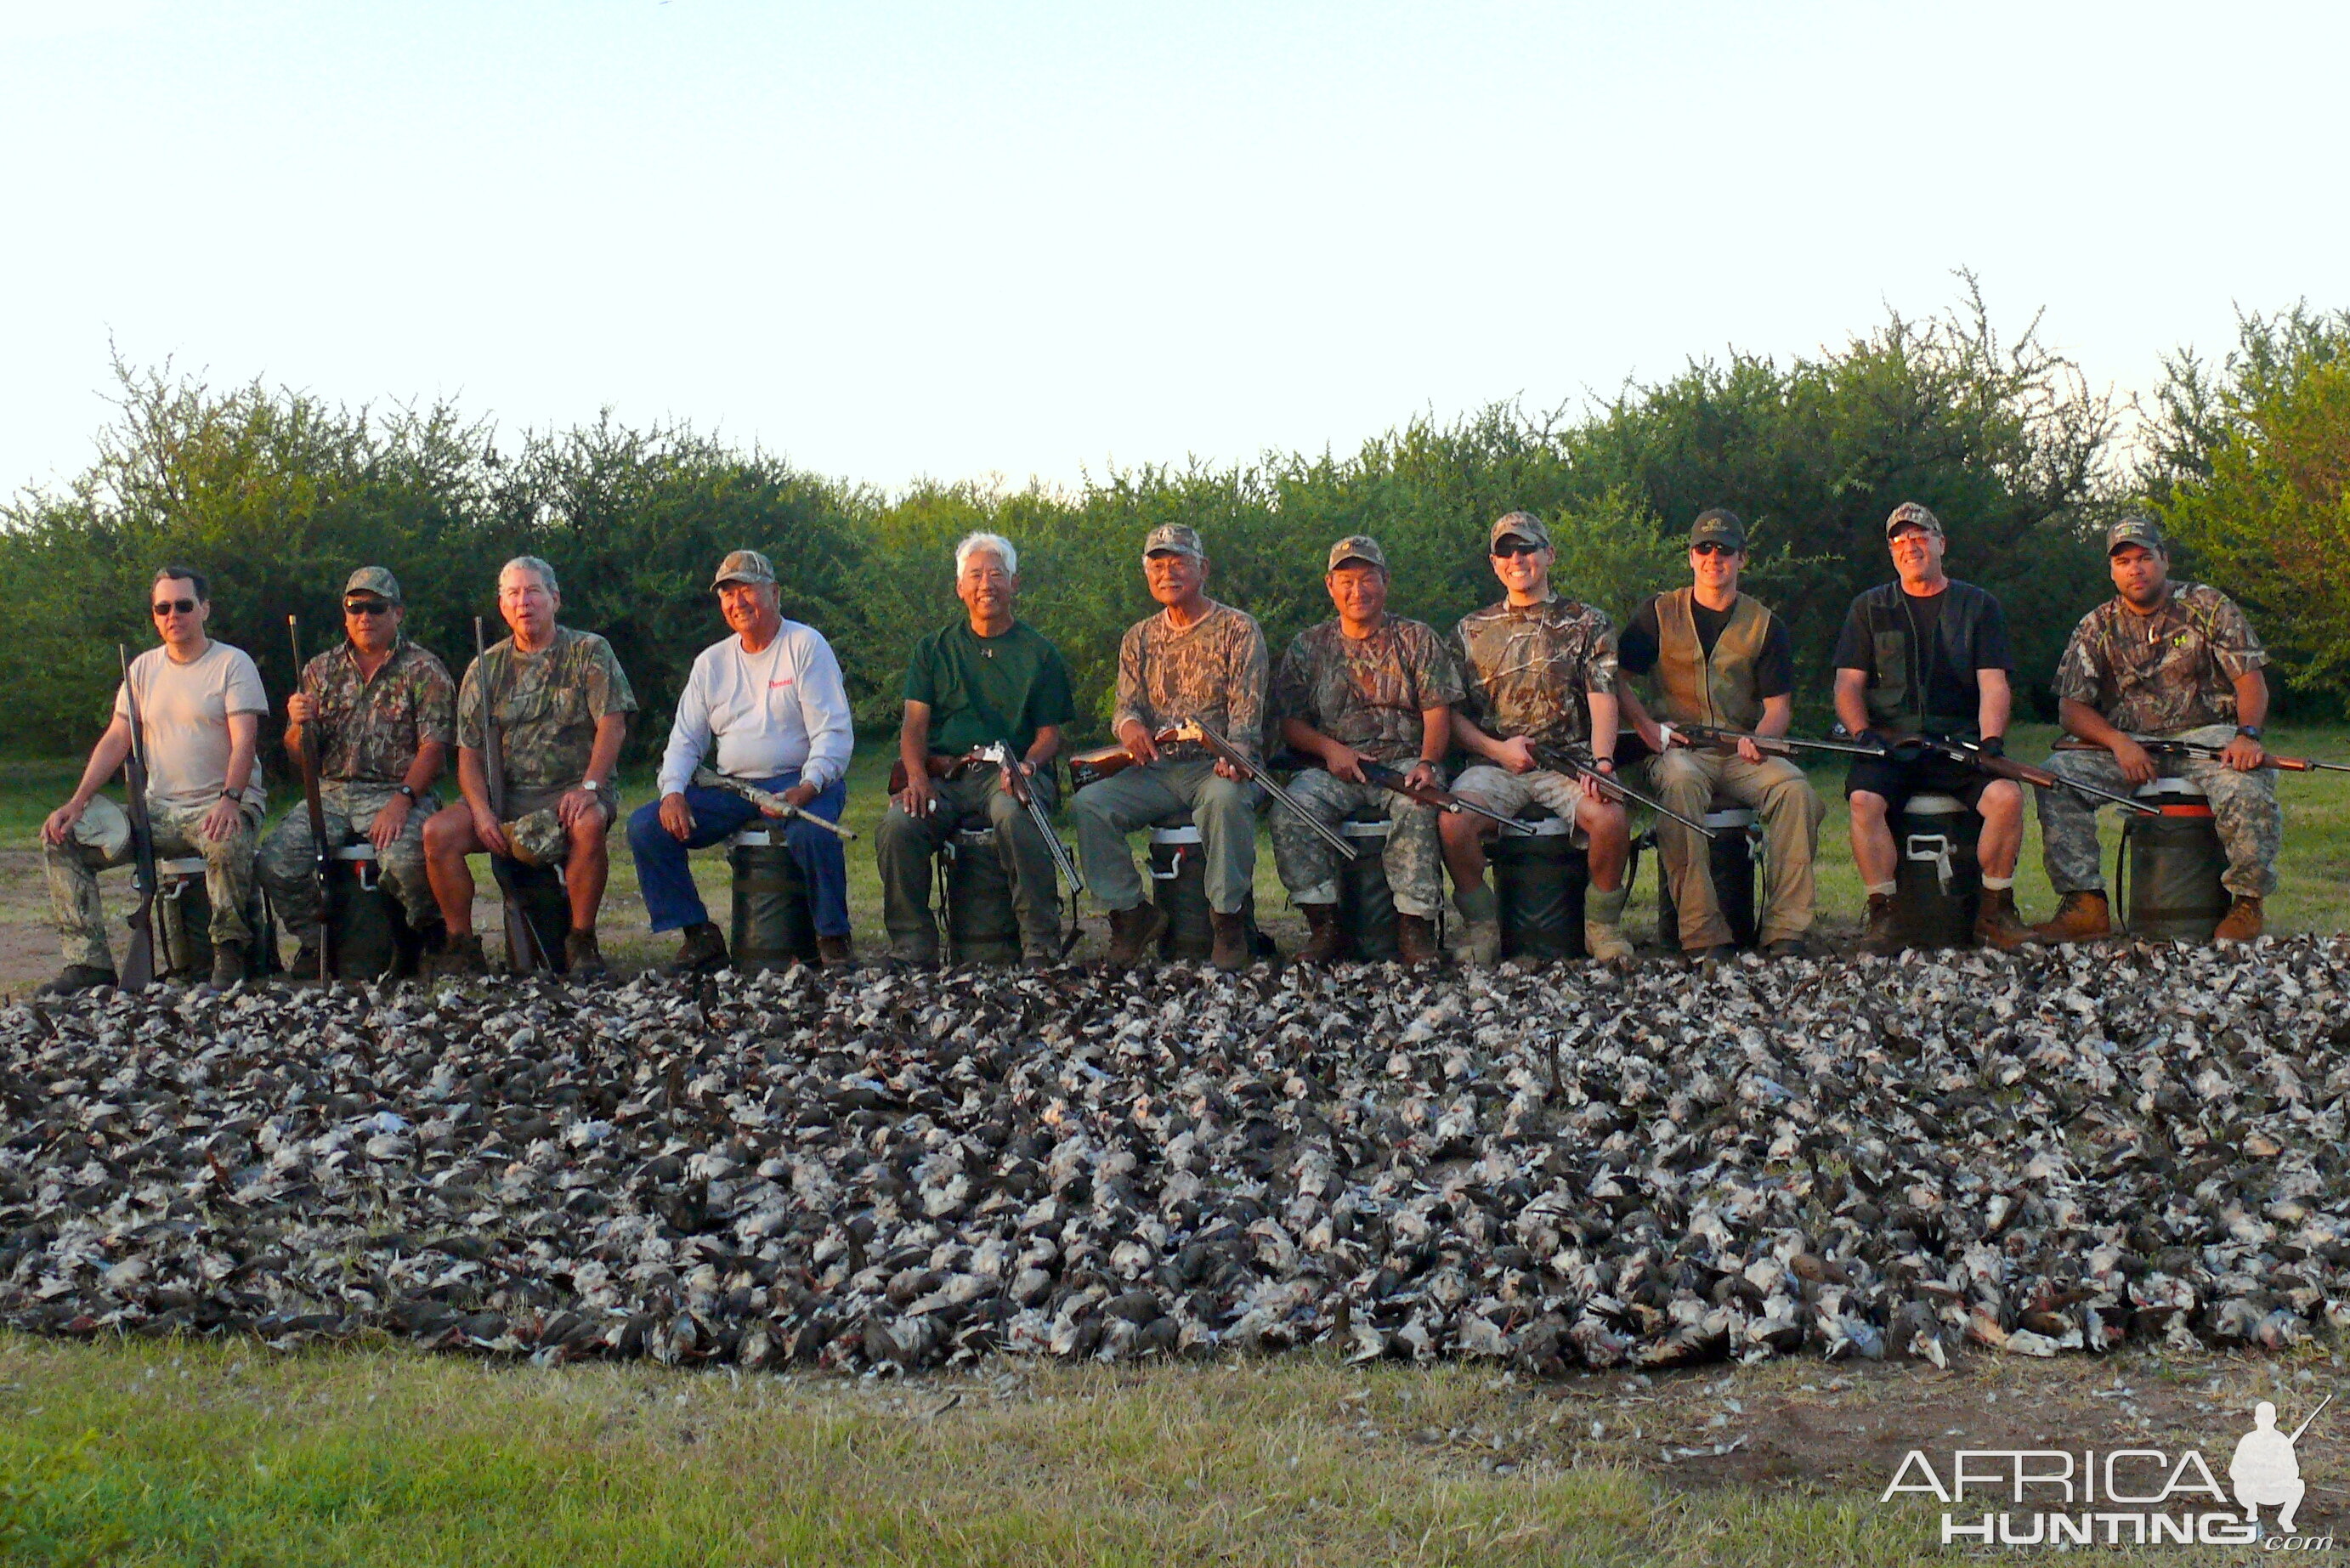 Fabulous dove shooting in Argentina